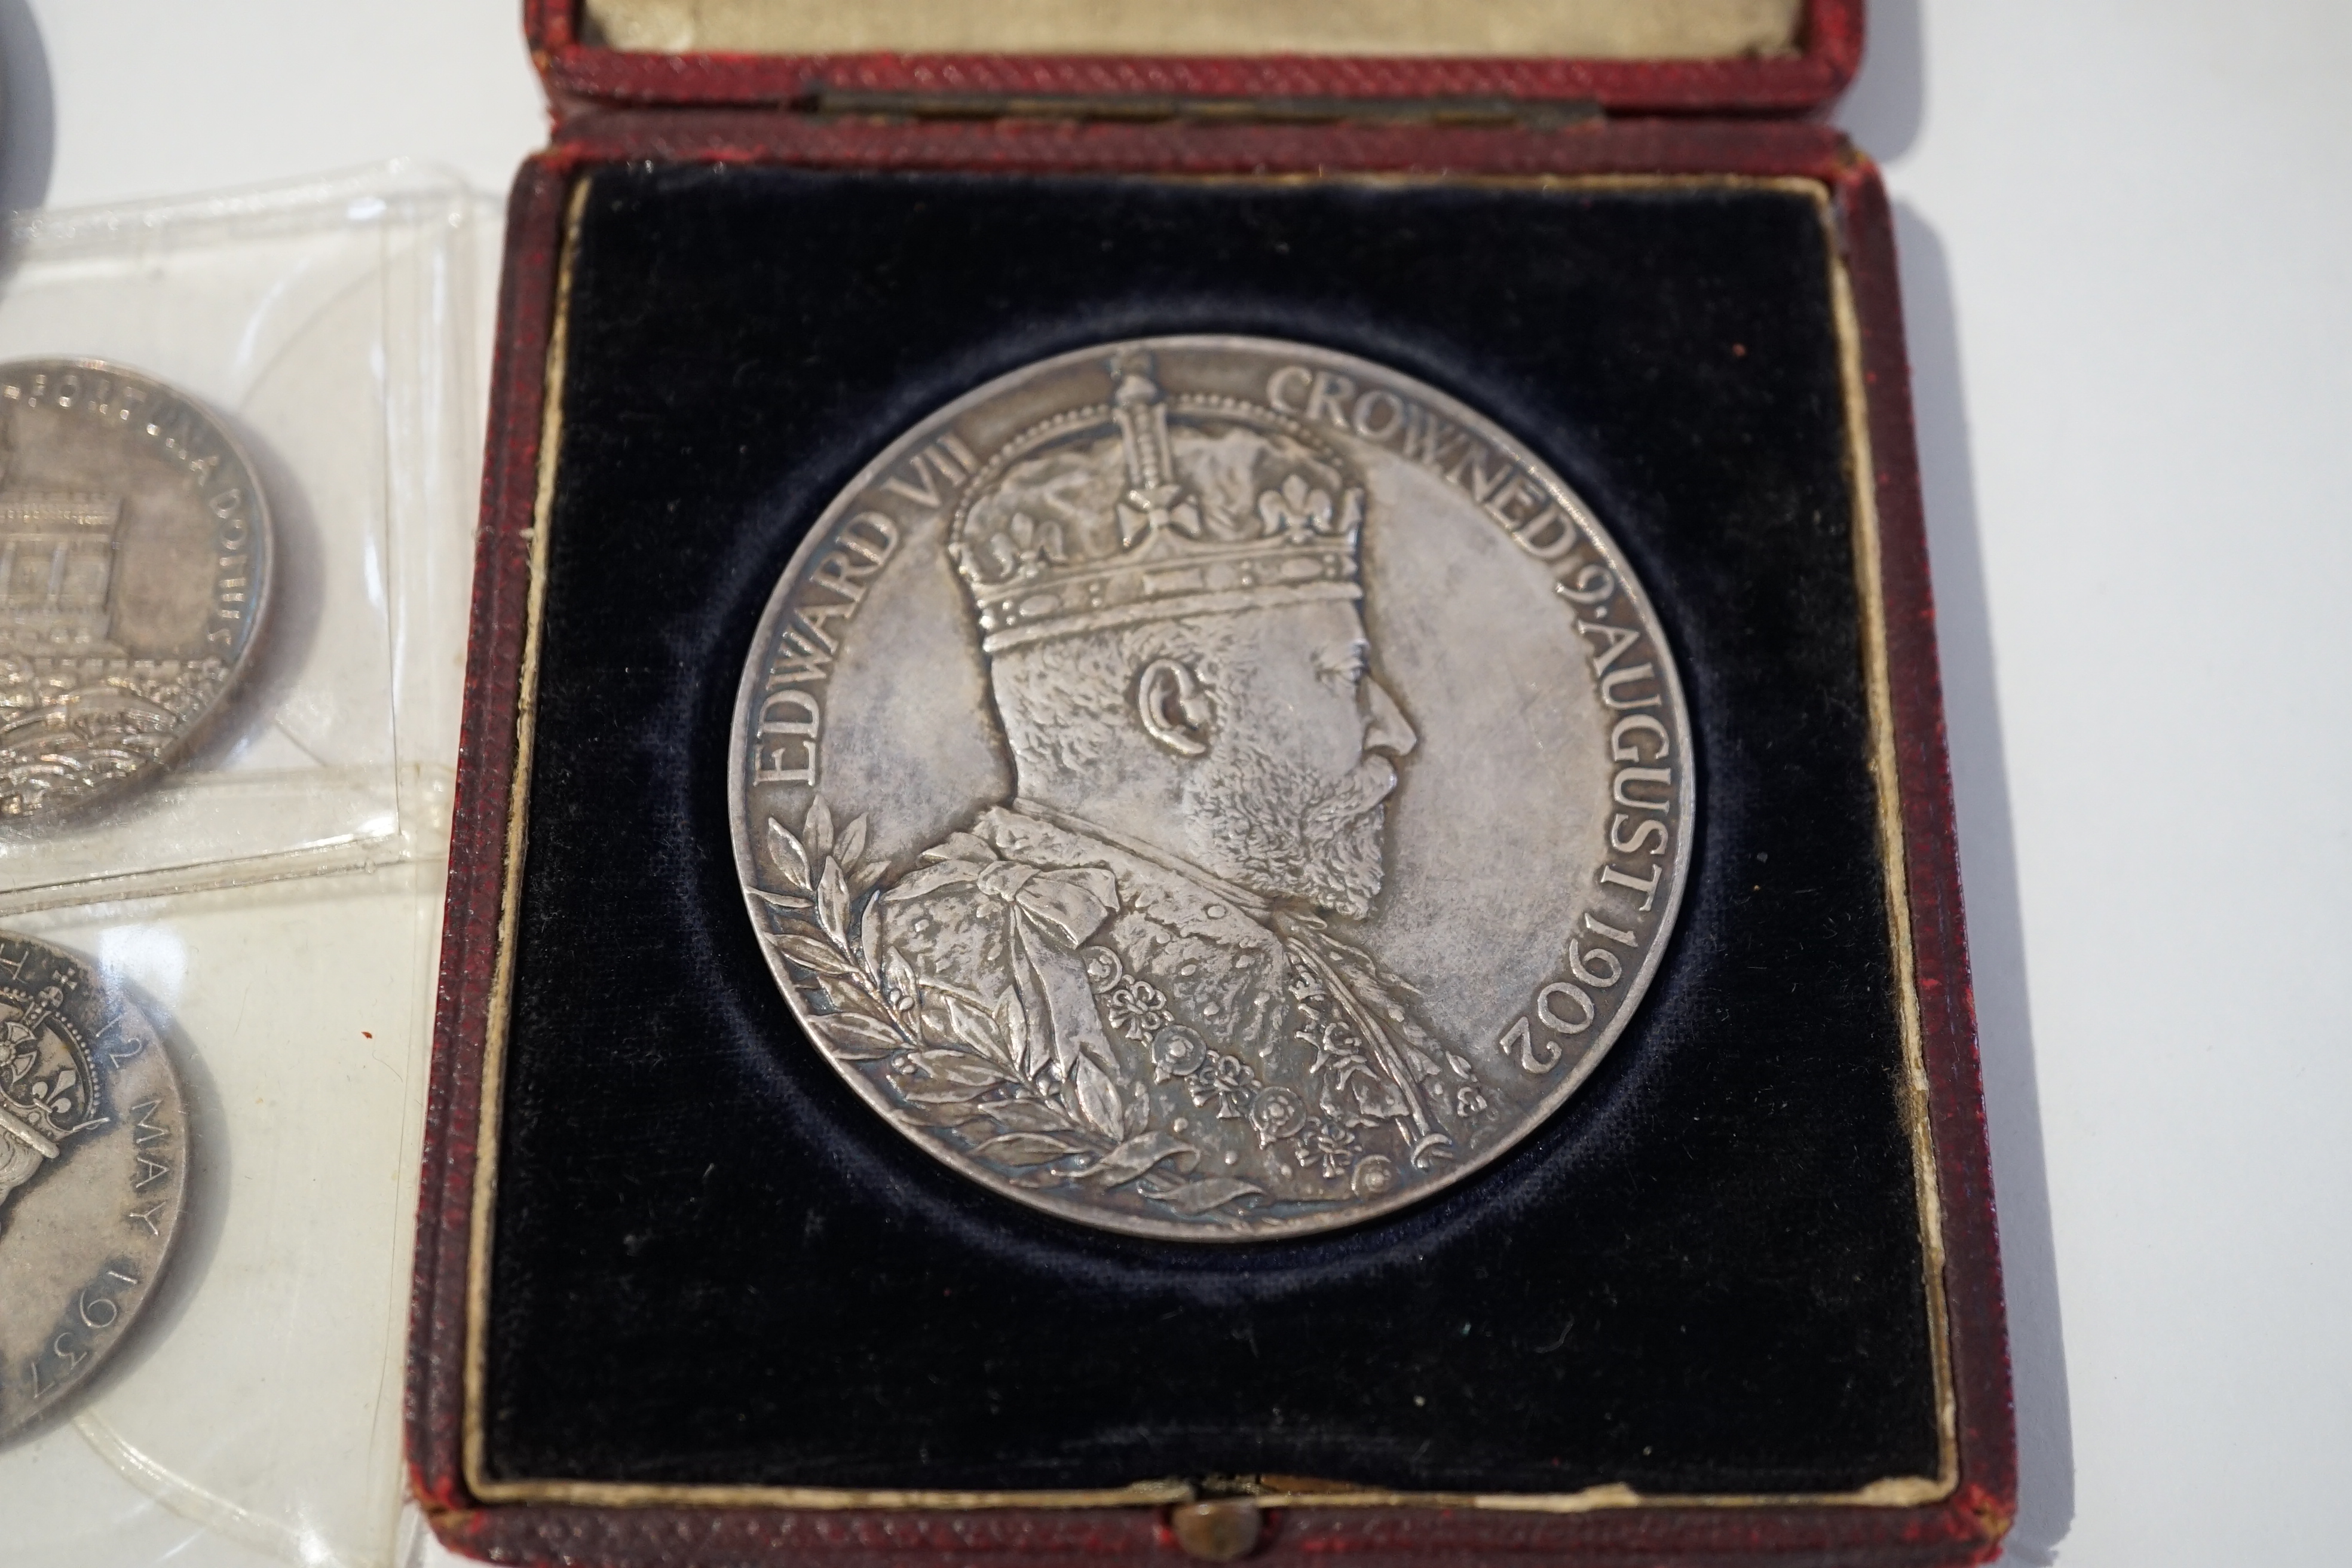 British Royal commemorative silver medals, comprising Victoria Diamond Jubilee, 1897, Edward VII Coronation 1902, cased, George V and Mary Silver Jubilee, 1935, George VI coronation 1937, Prince of Wales investiture 1969